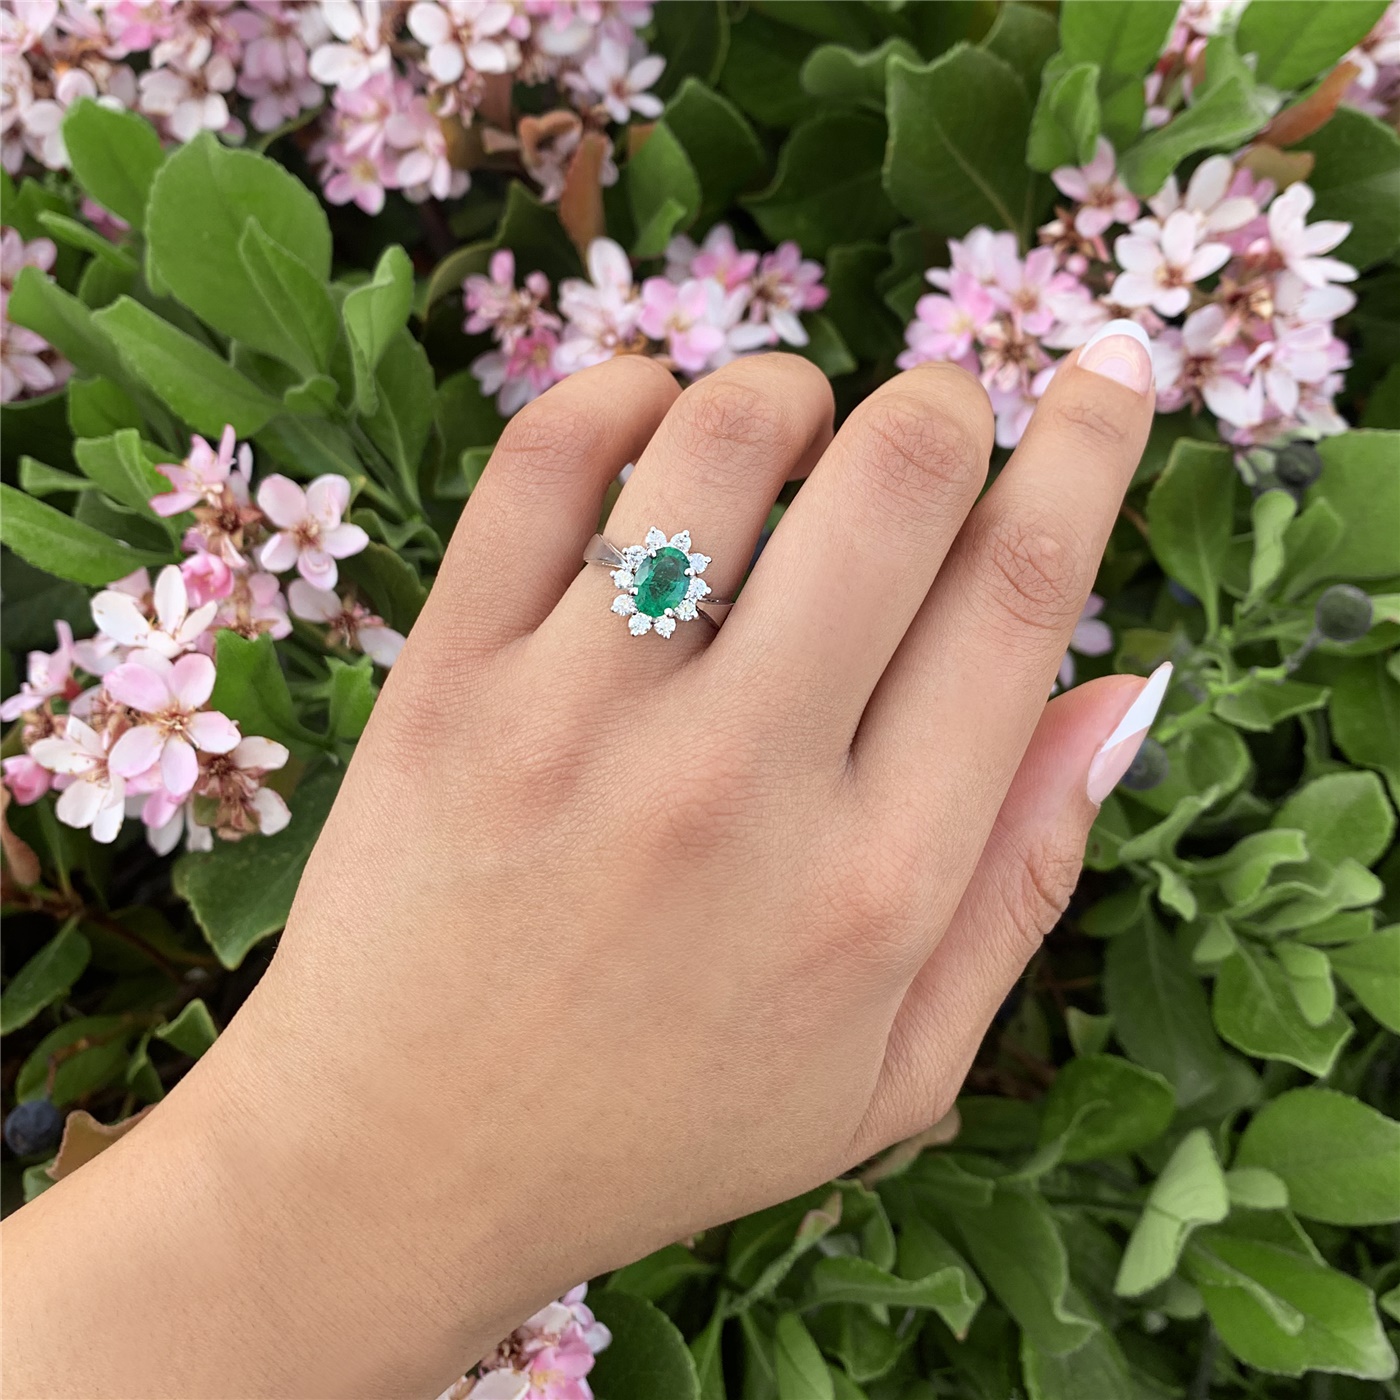 Oval Emerald and Diamond Ballerina Style Ring - Rings